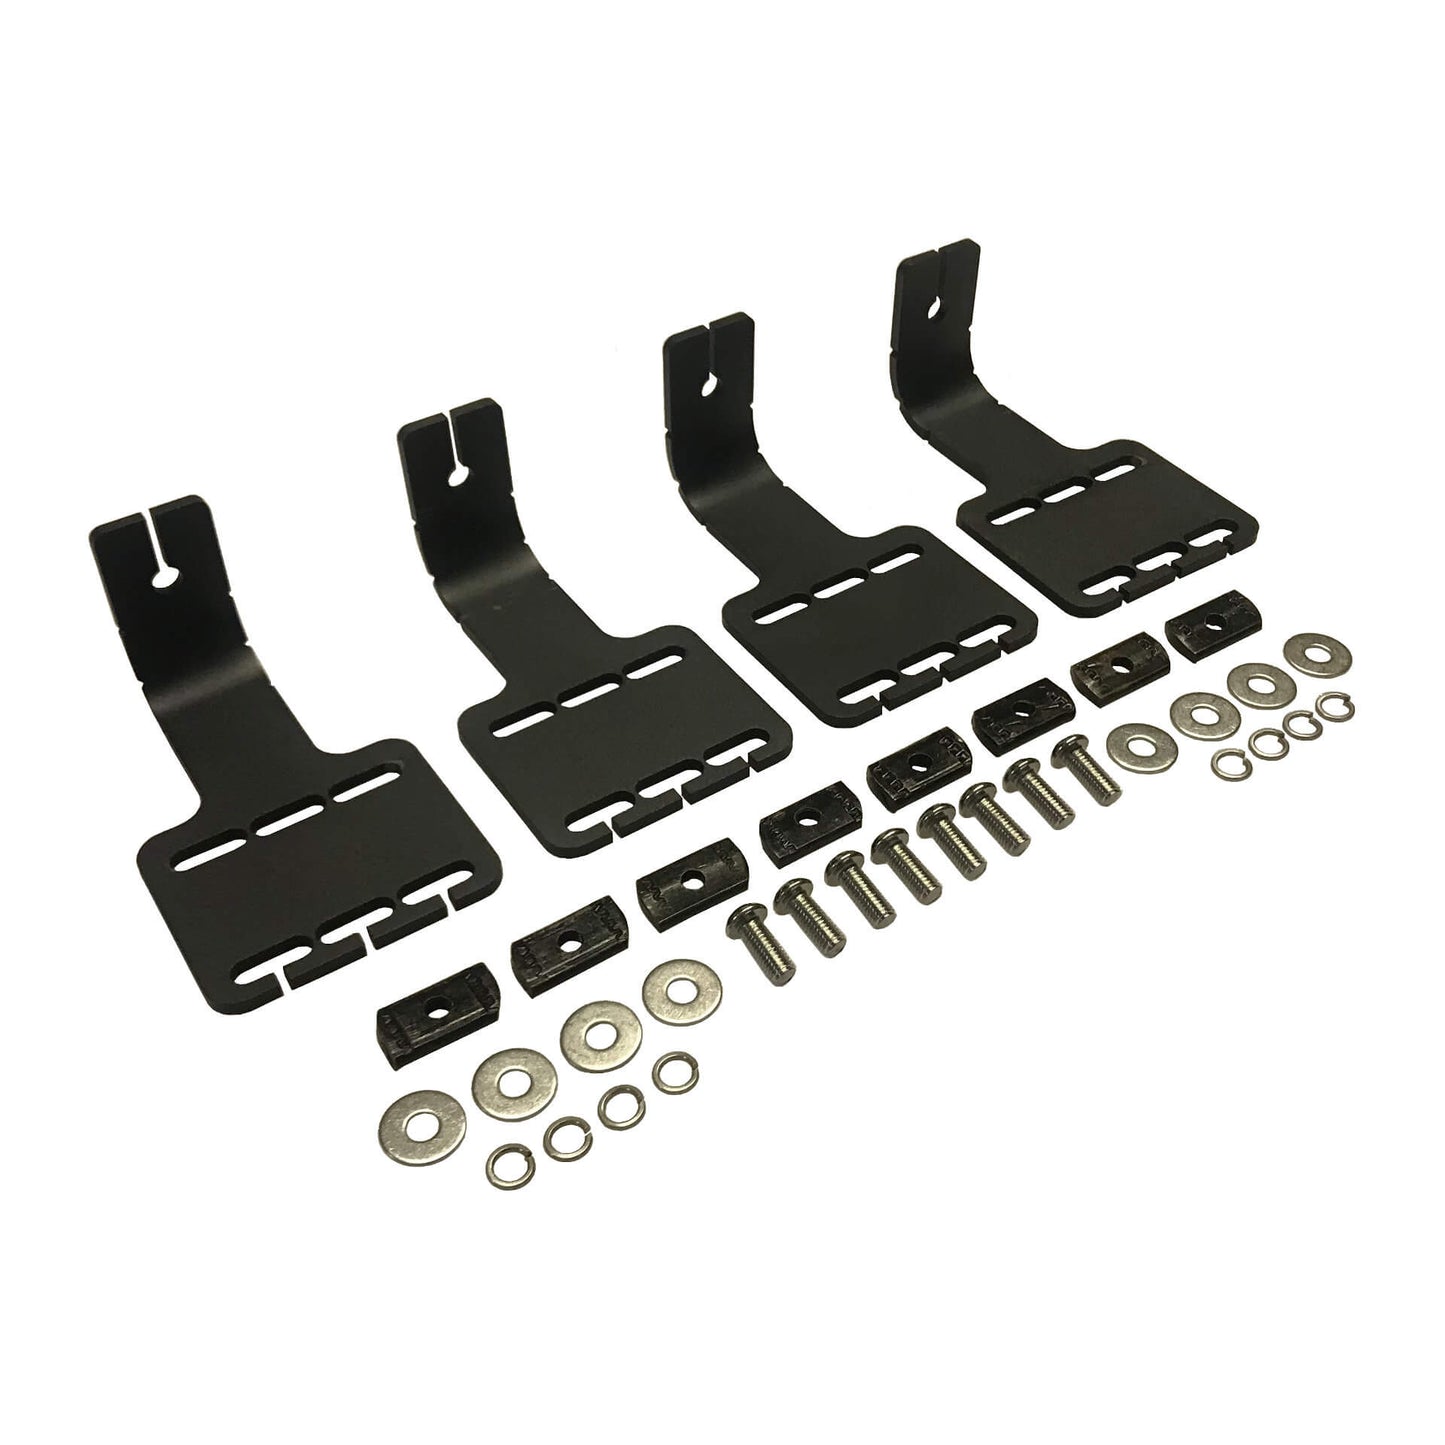 Set of Four LED Light Brackets for Direct4x4 AluMod Low Profile Roof Racks -  - sold by Direct4x4